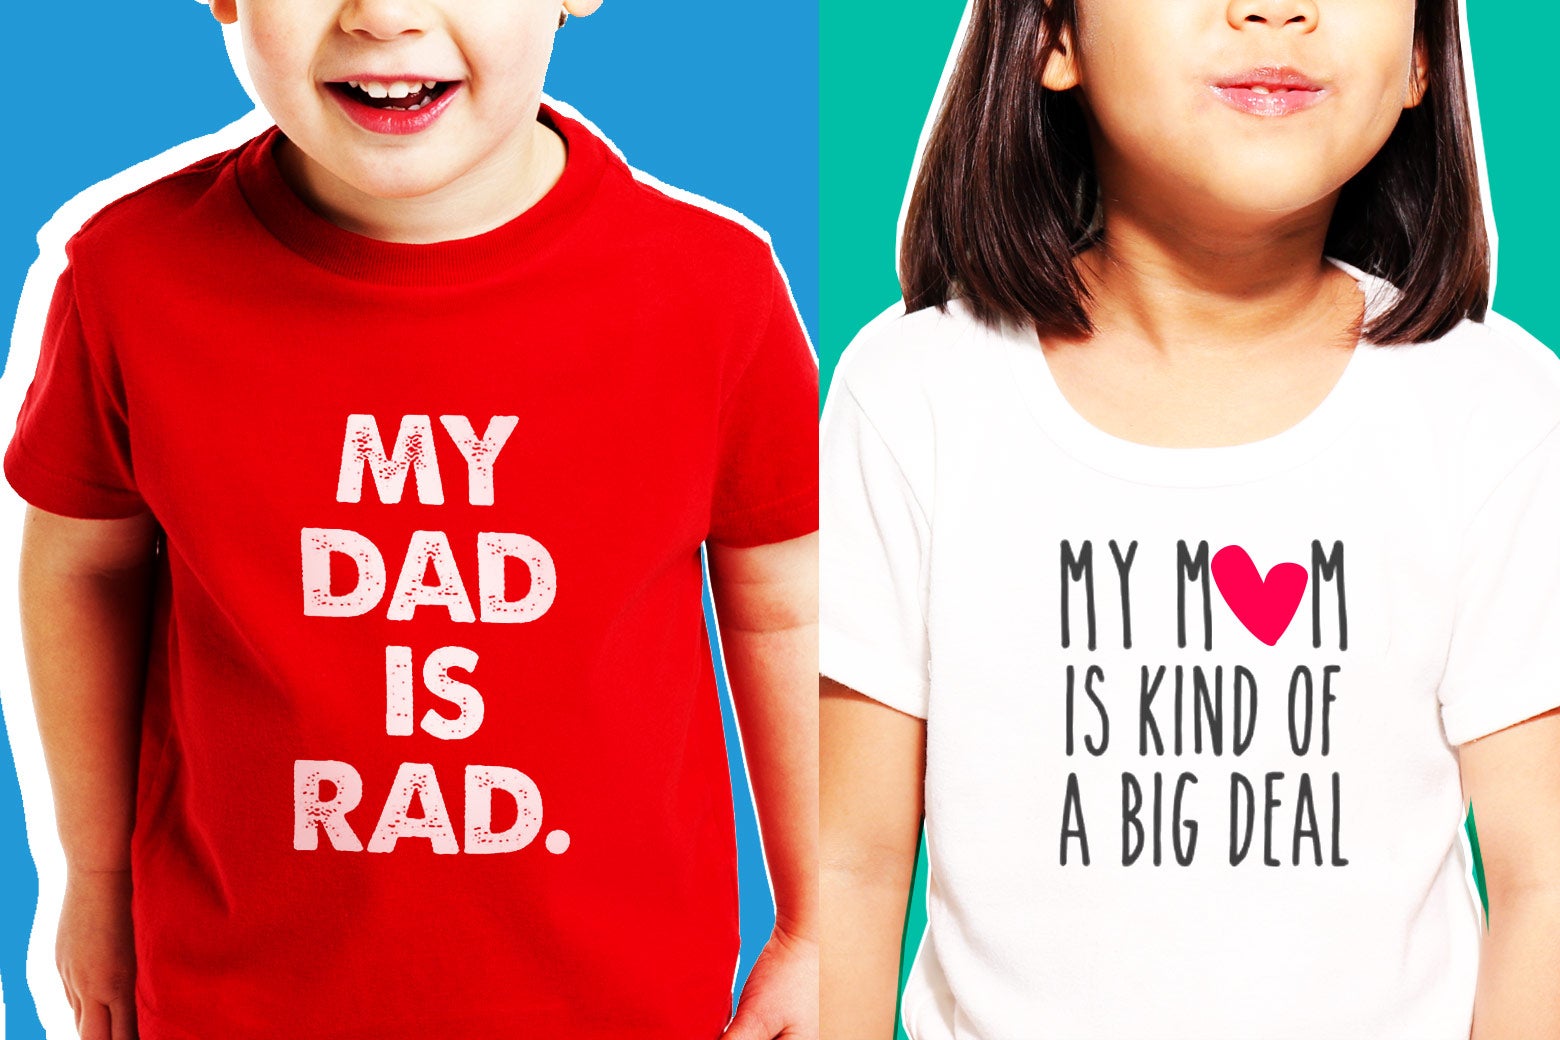 Kids wearing shirts saying, “My dad is rad” and “My mom is kind of a big deal.”